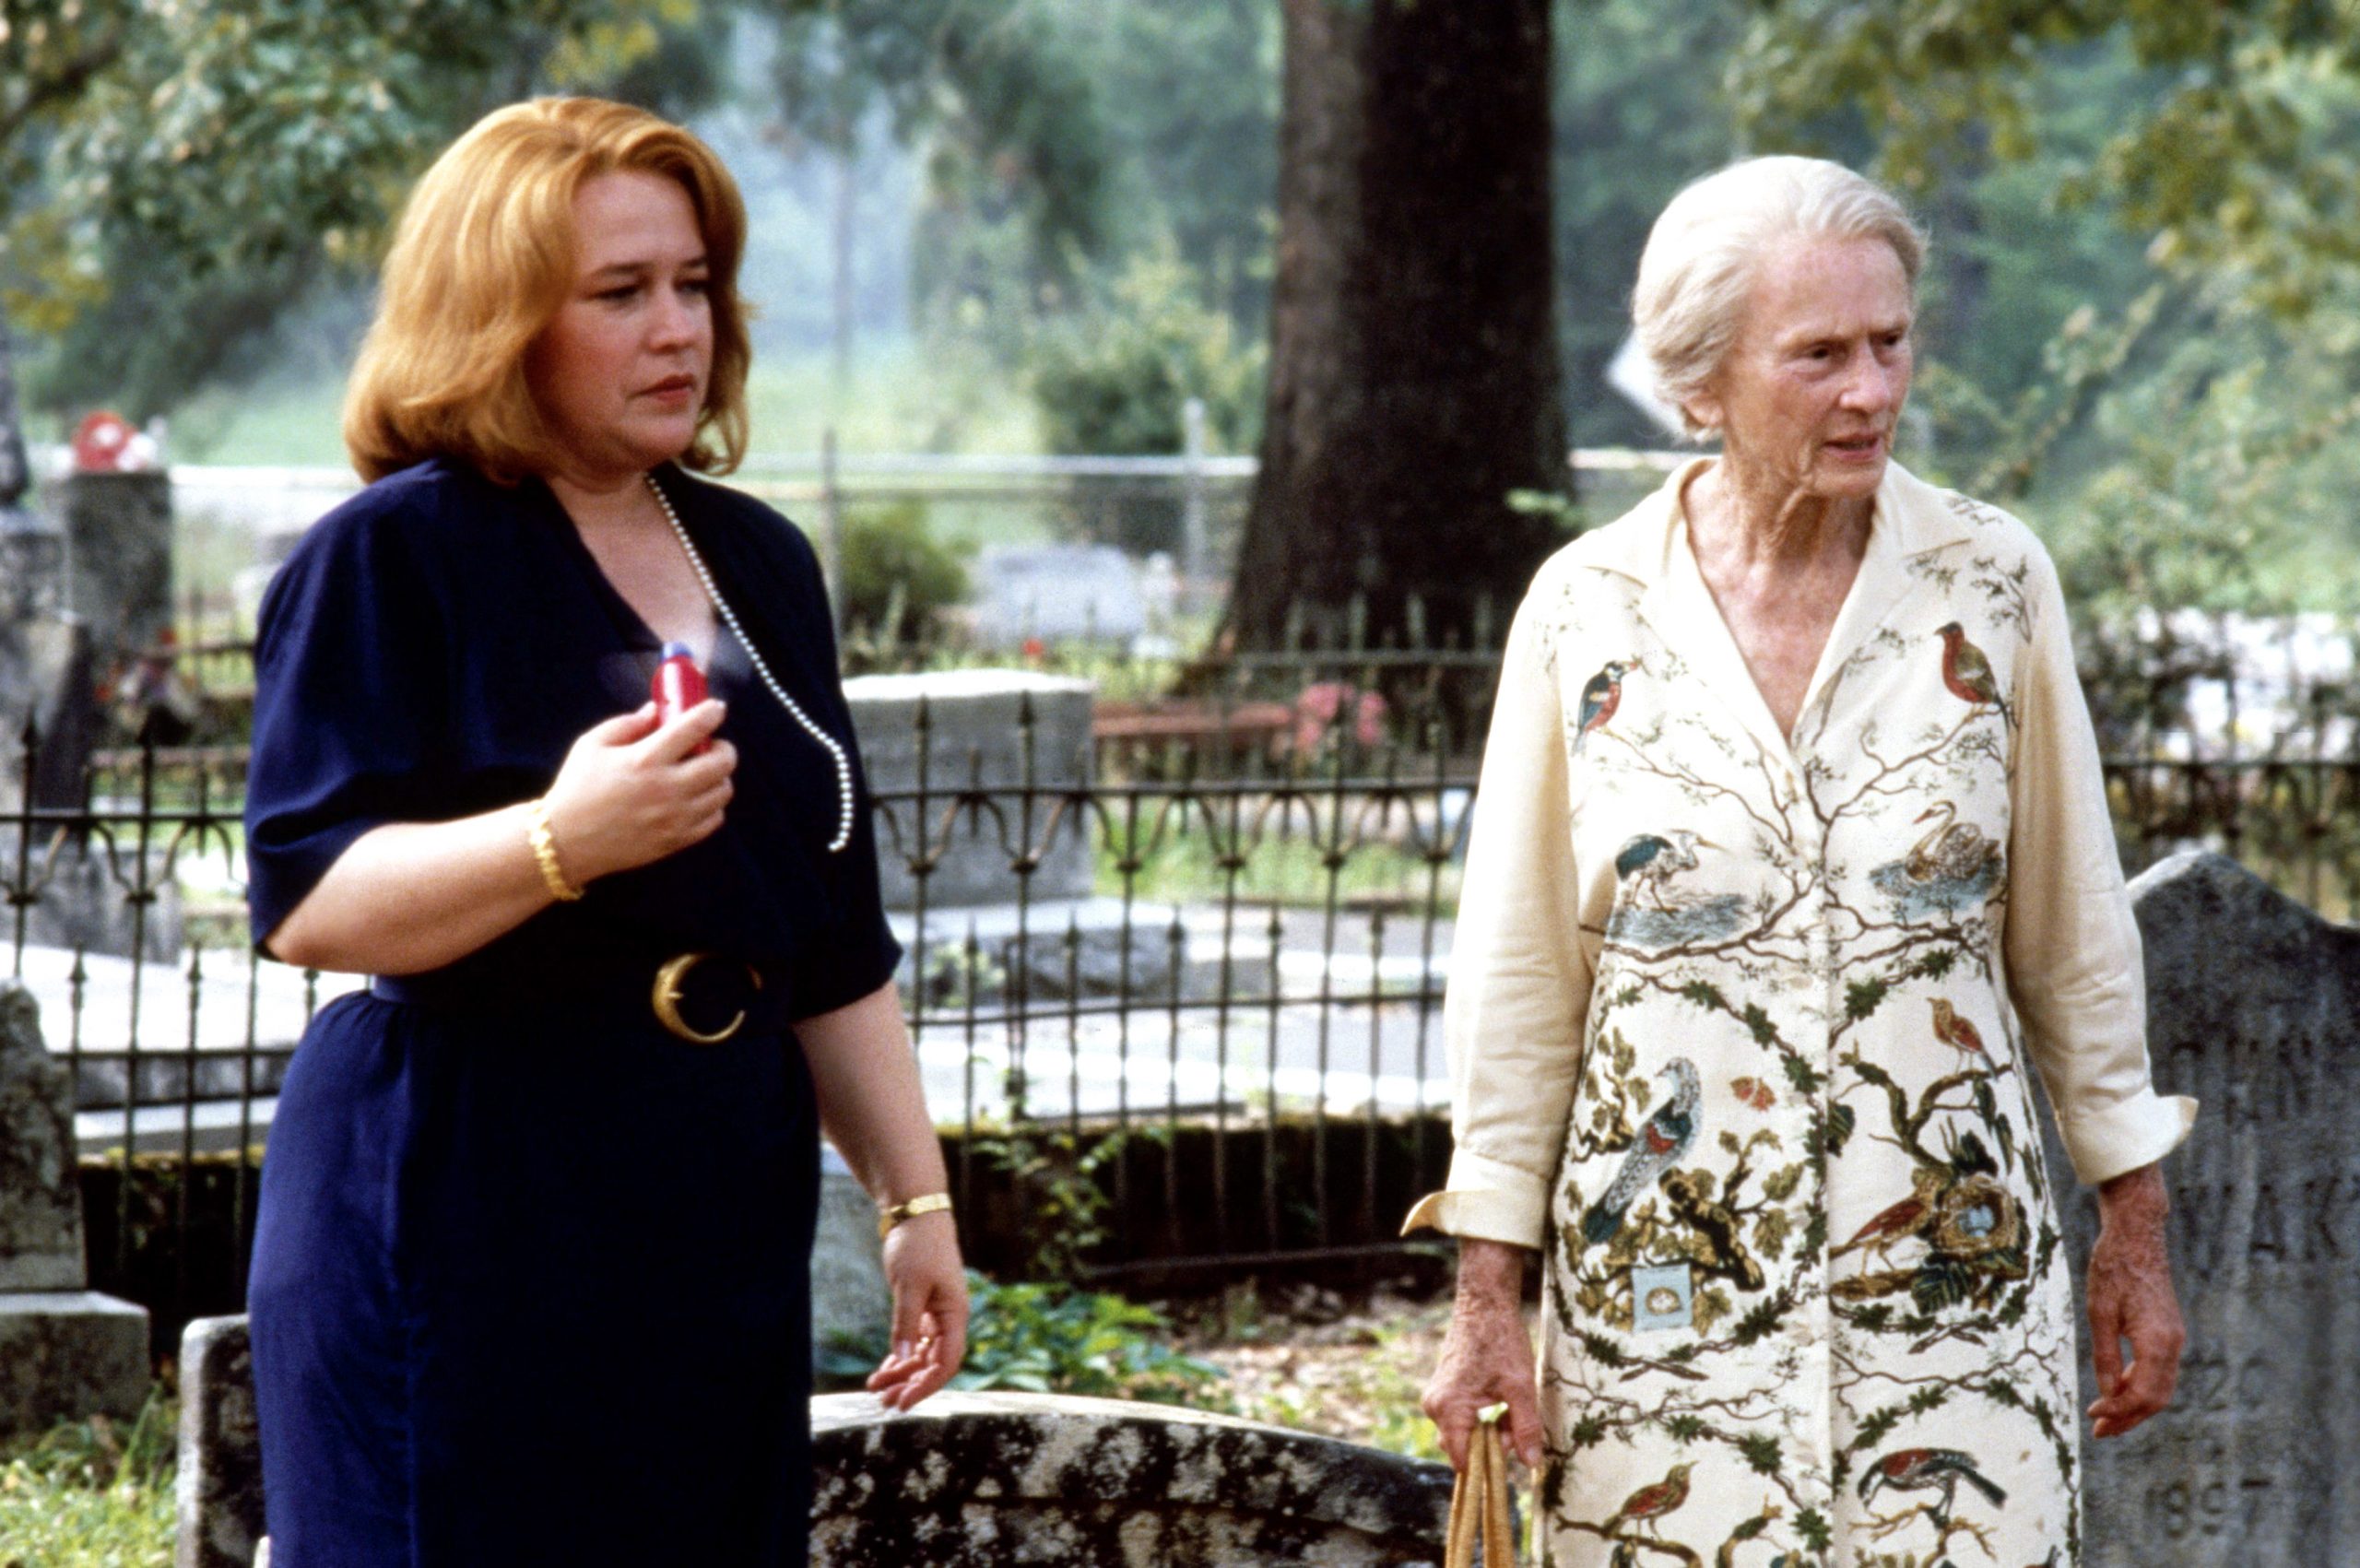 Left to right, Kathy Bates and Jessica Tandy in Fried Green Tomatoes